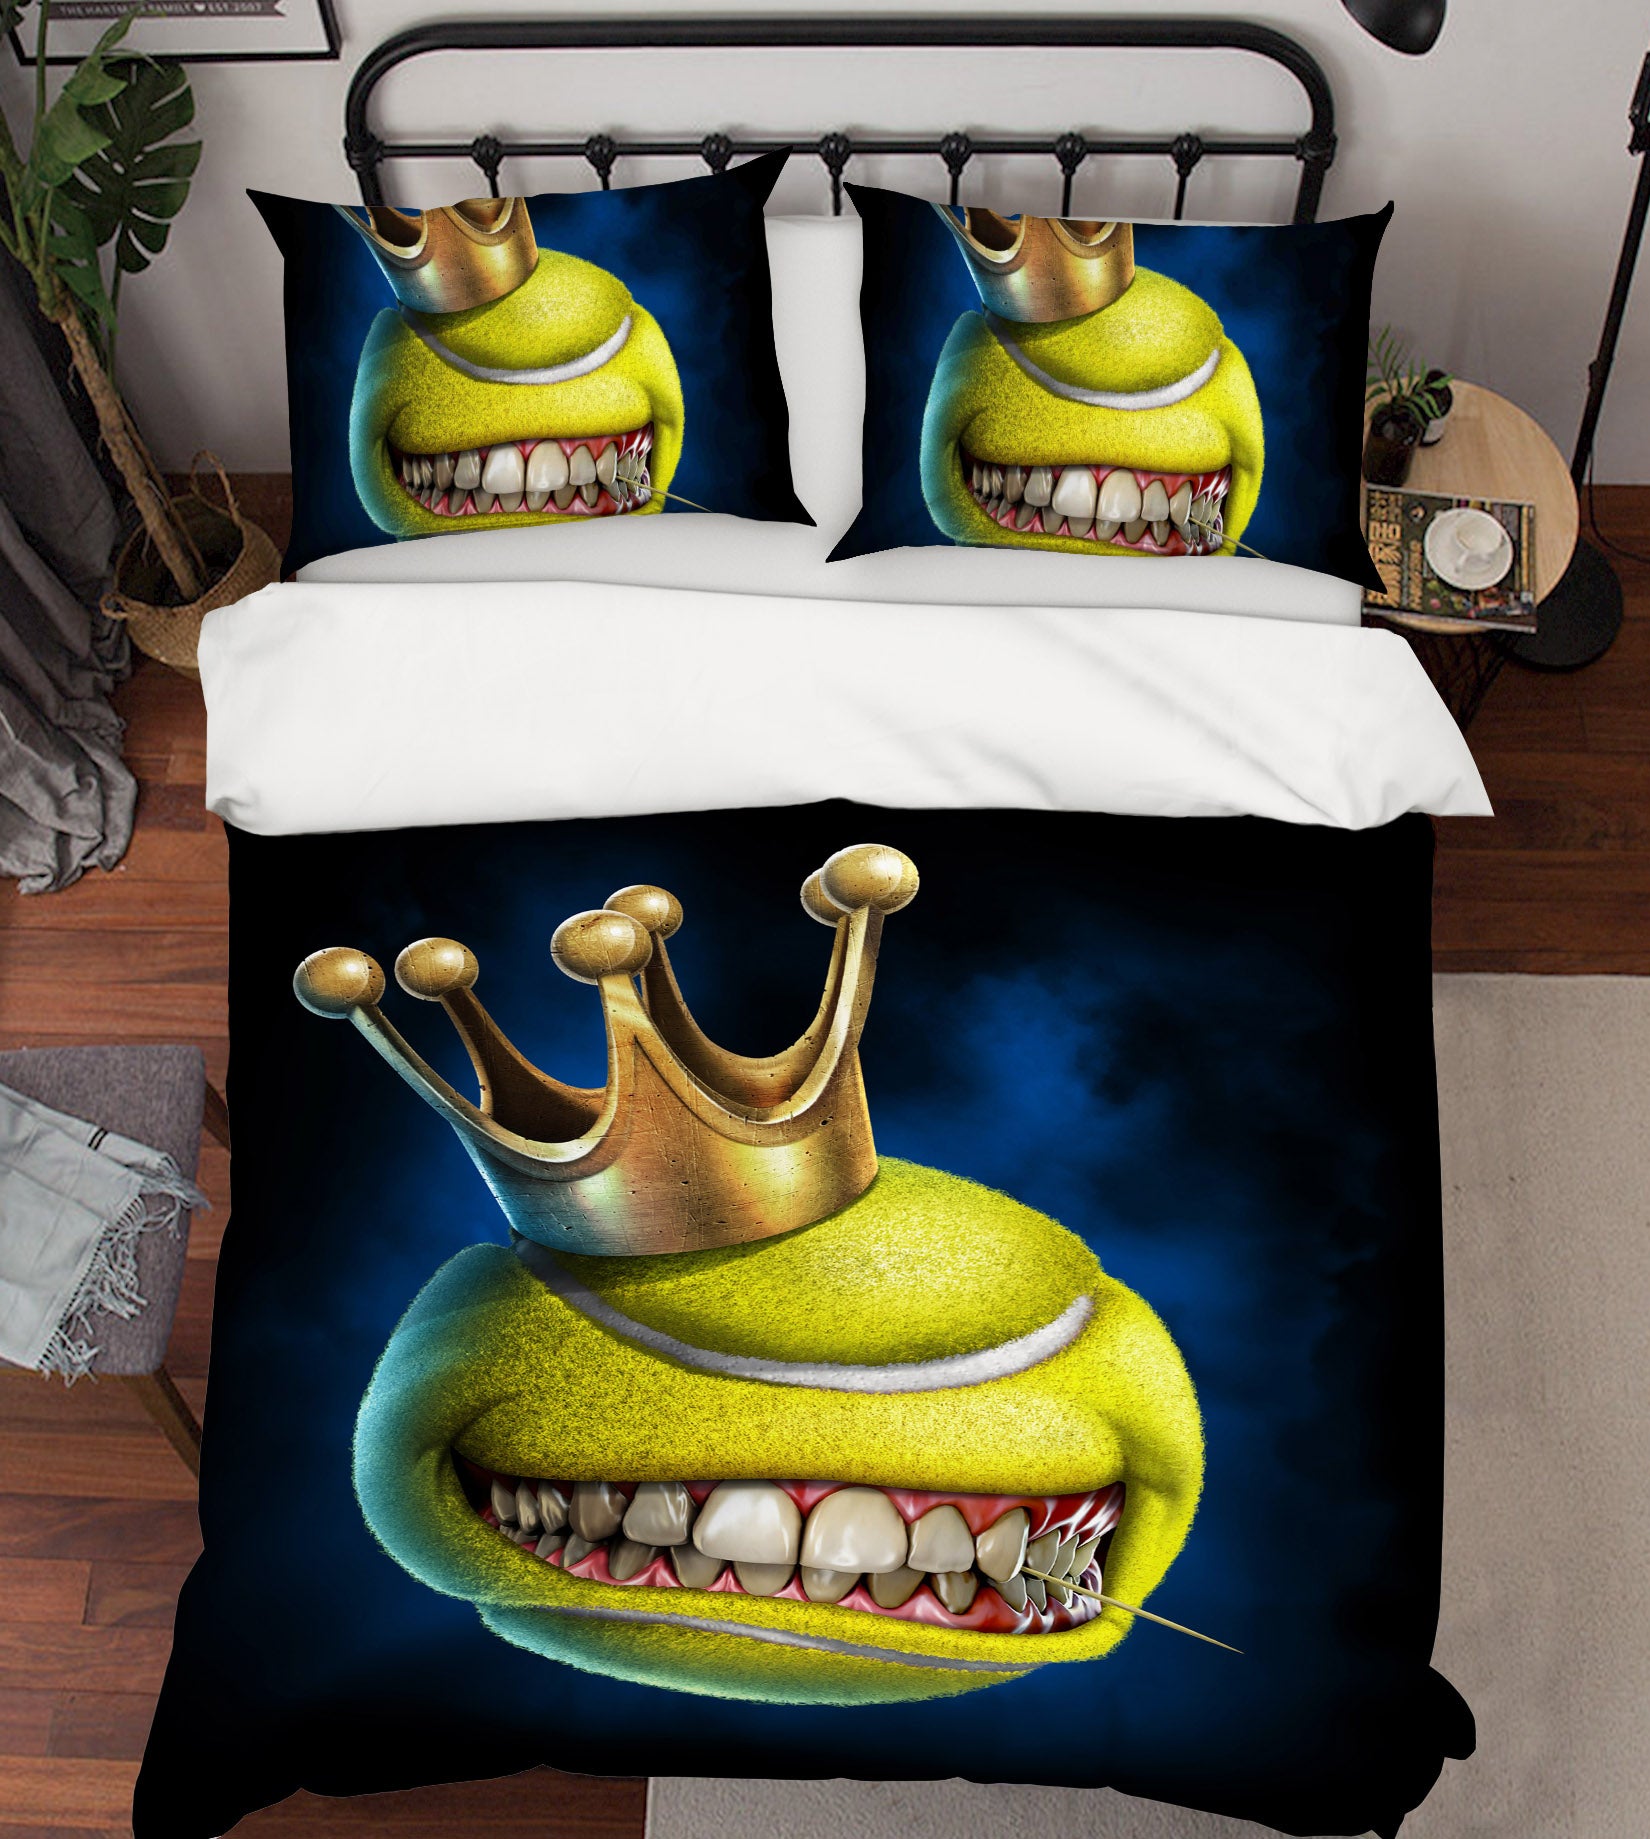 3D Tennis Tooth Crown 4054 Tom Wood Bedding Bed Pillowcases Quilt